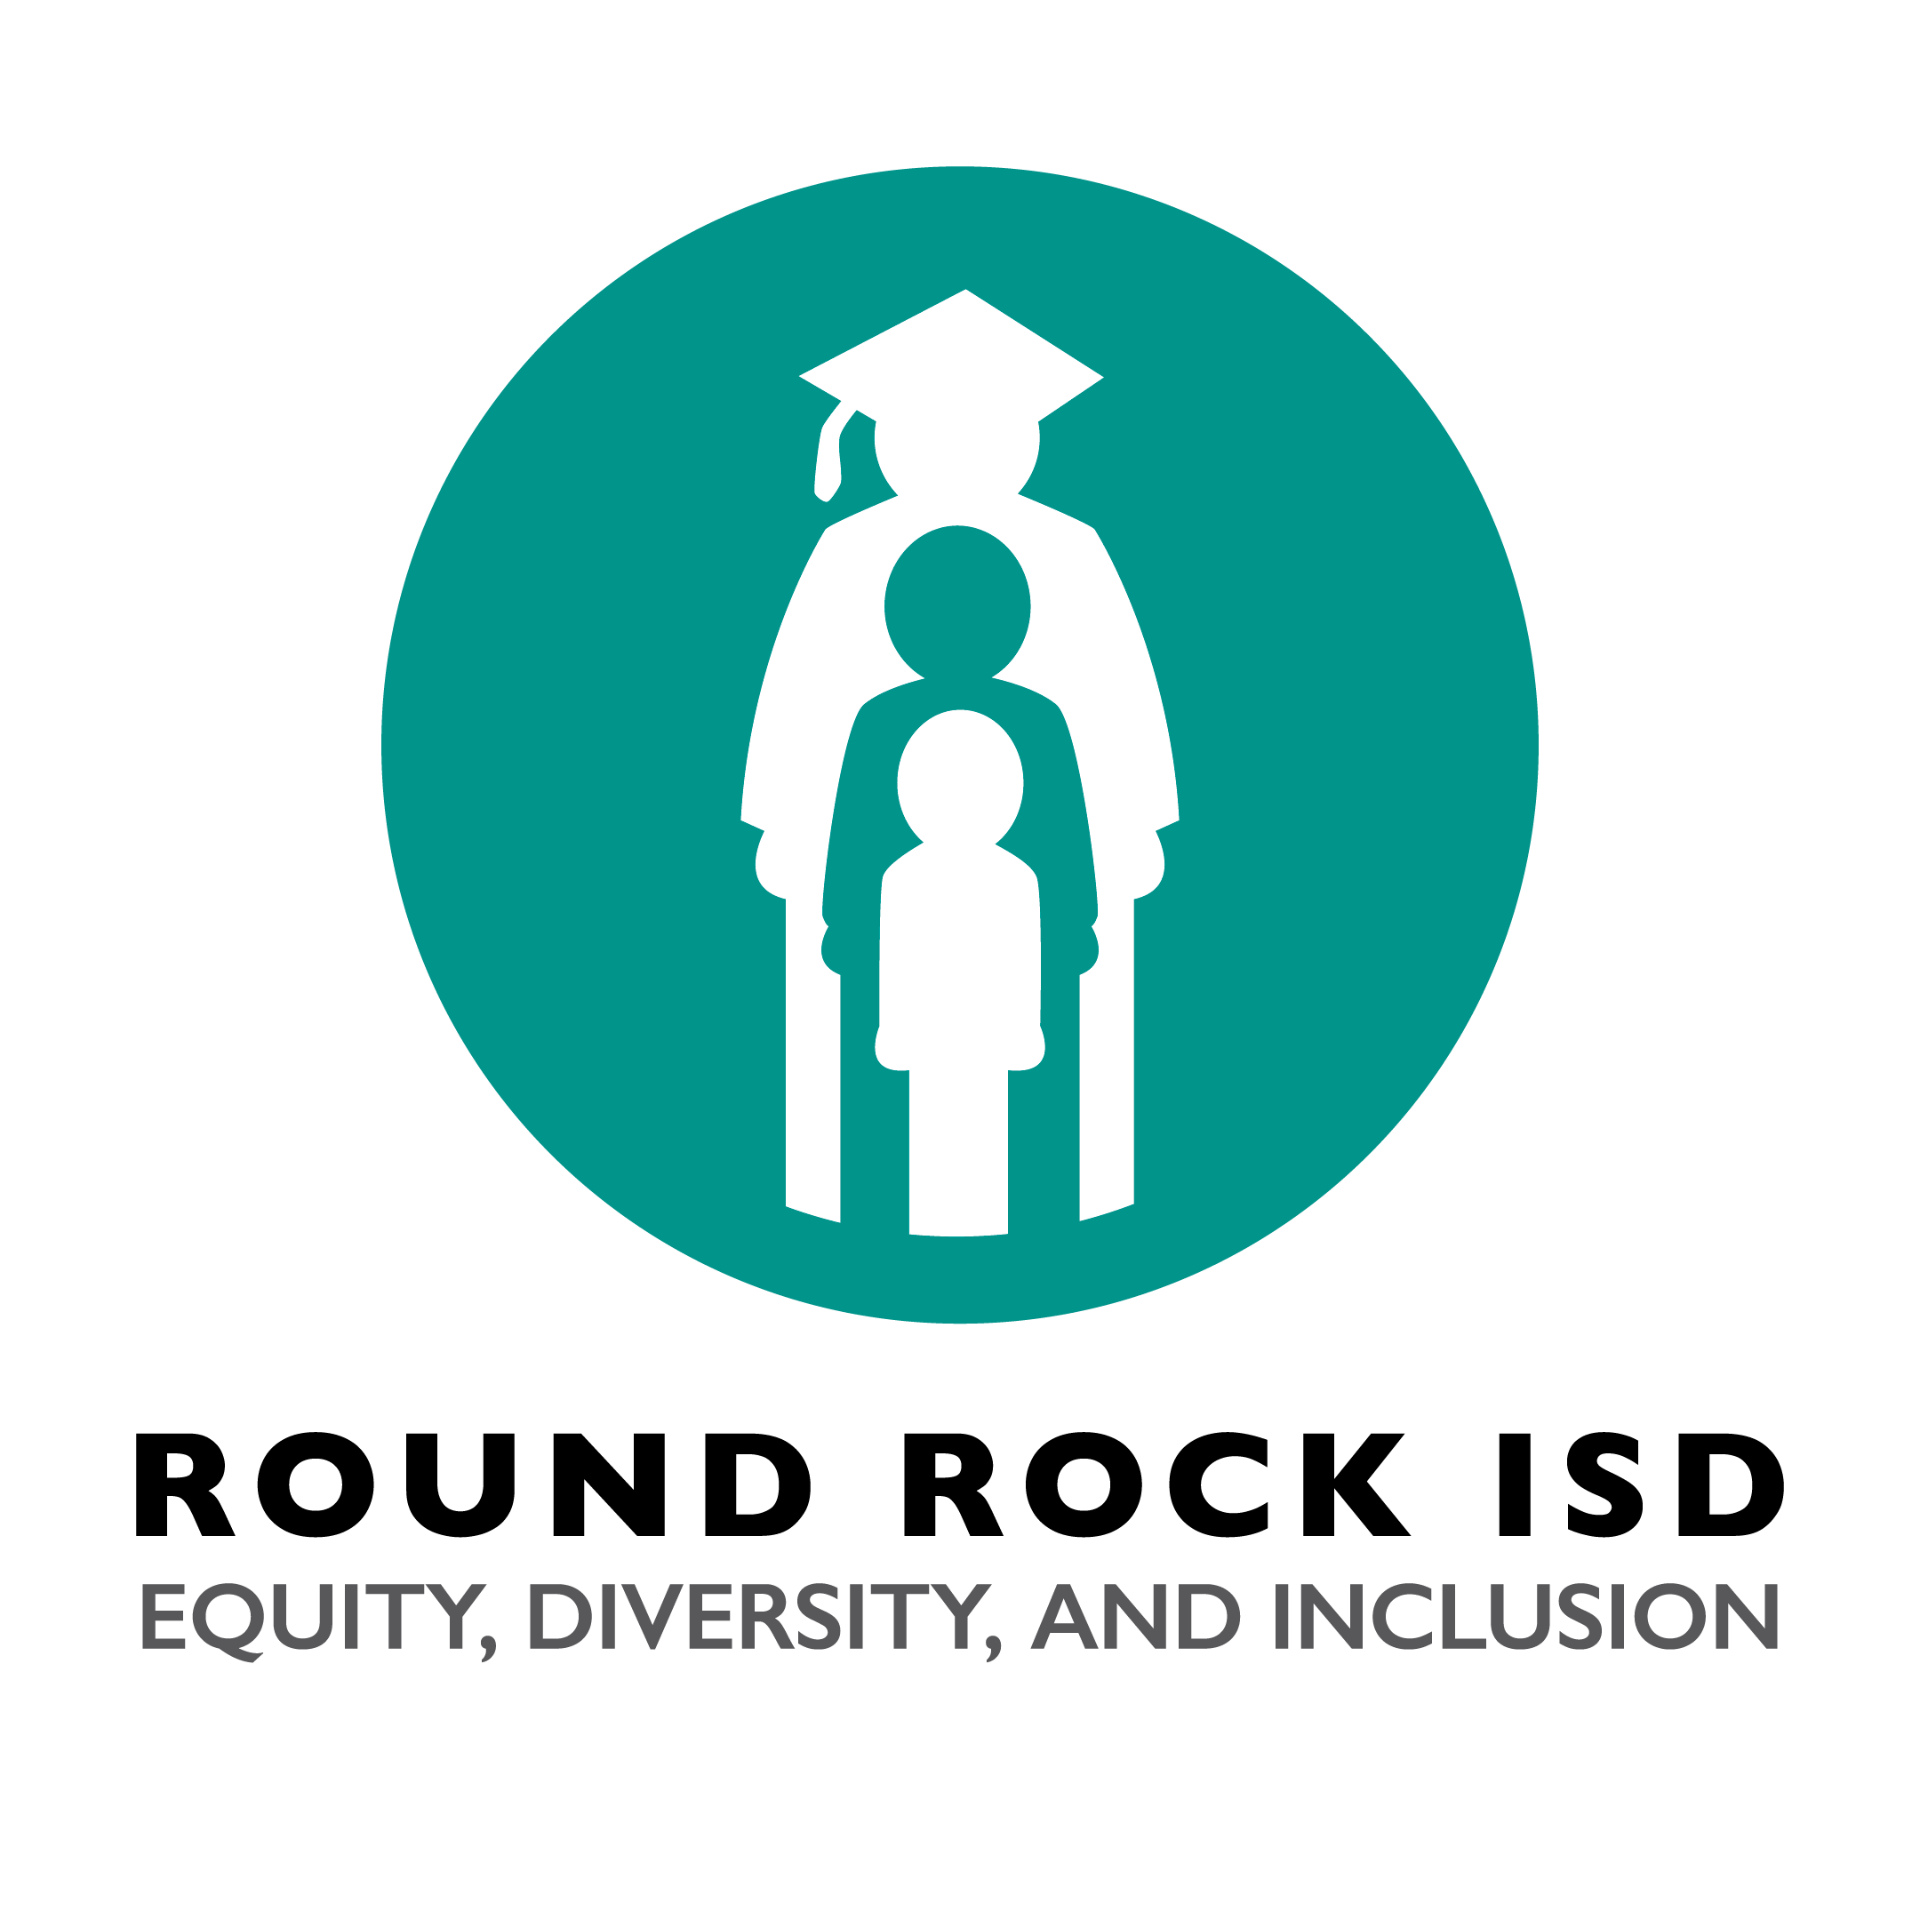 Round Rock ISD - Equity, Diversity, and Inclusion